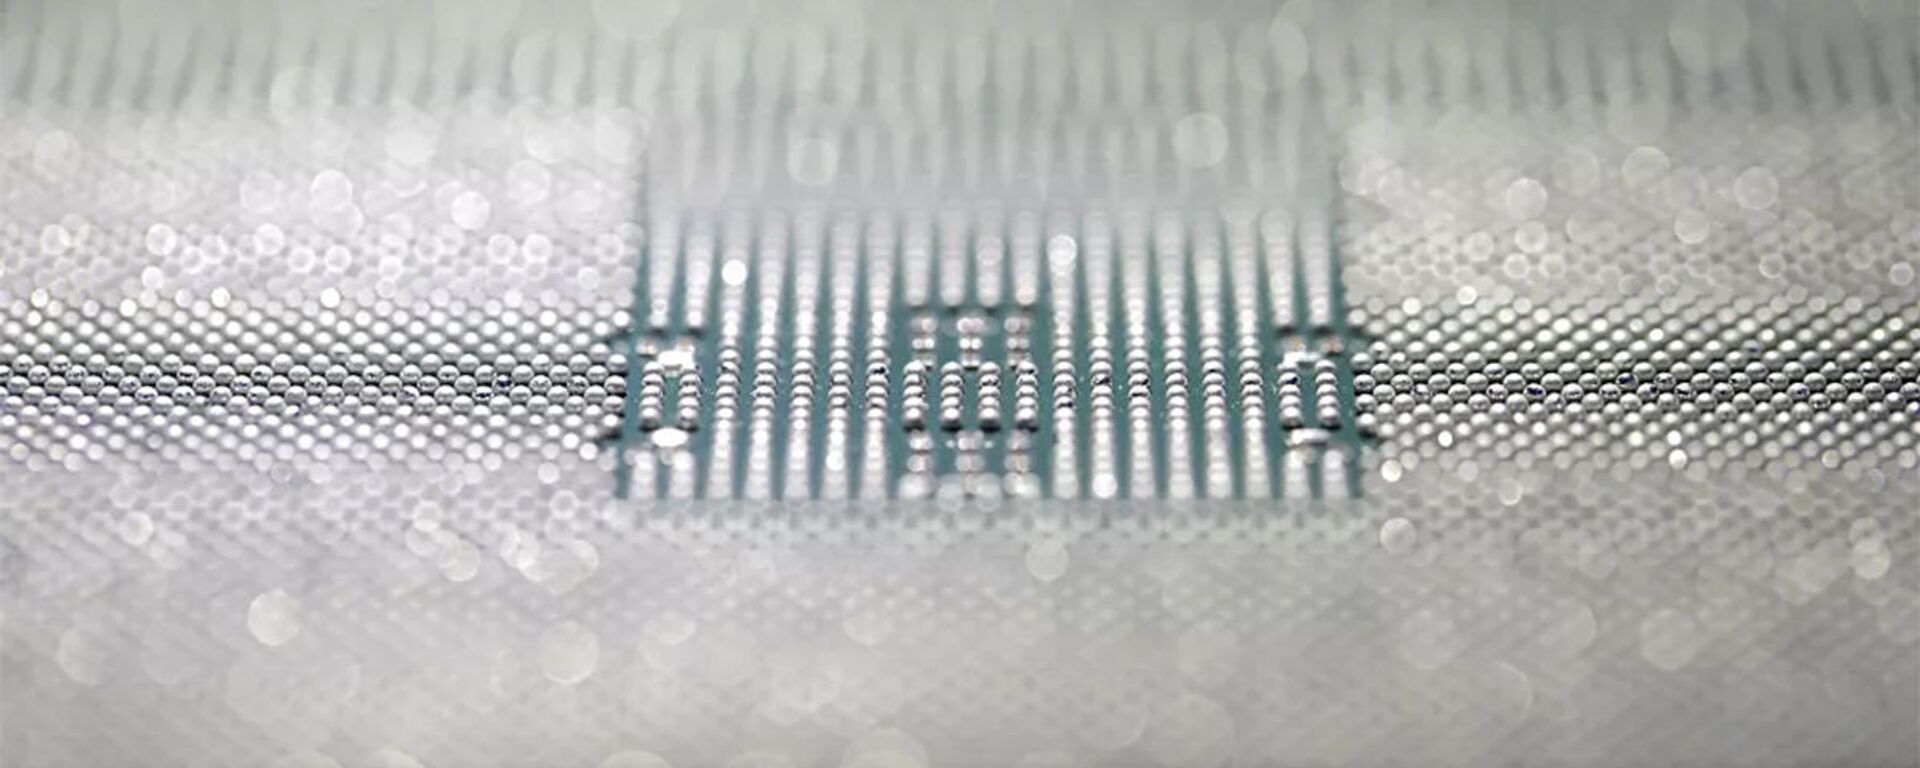 A Kunpeng 920 chip is displayed during an unveiling ceremony in Shenzhen, China, Monday, Jan. 7, 2019. Chinese telecom giant Huawei unveiled a processor chip for data centers and cloud computing as it expands into an emerging global market despite Western warnings the company might be a security risk.  - 俄羅斯衛星通訊社, 1920, 10.09.2021